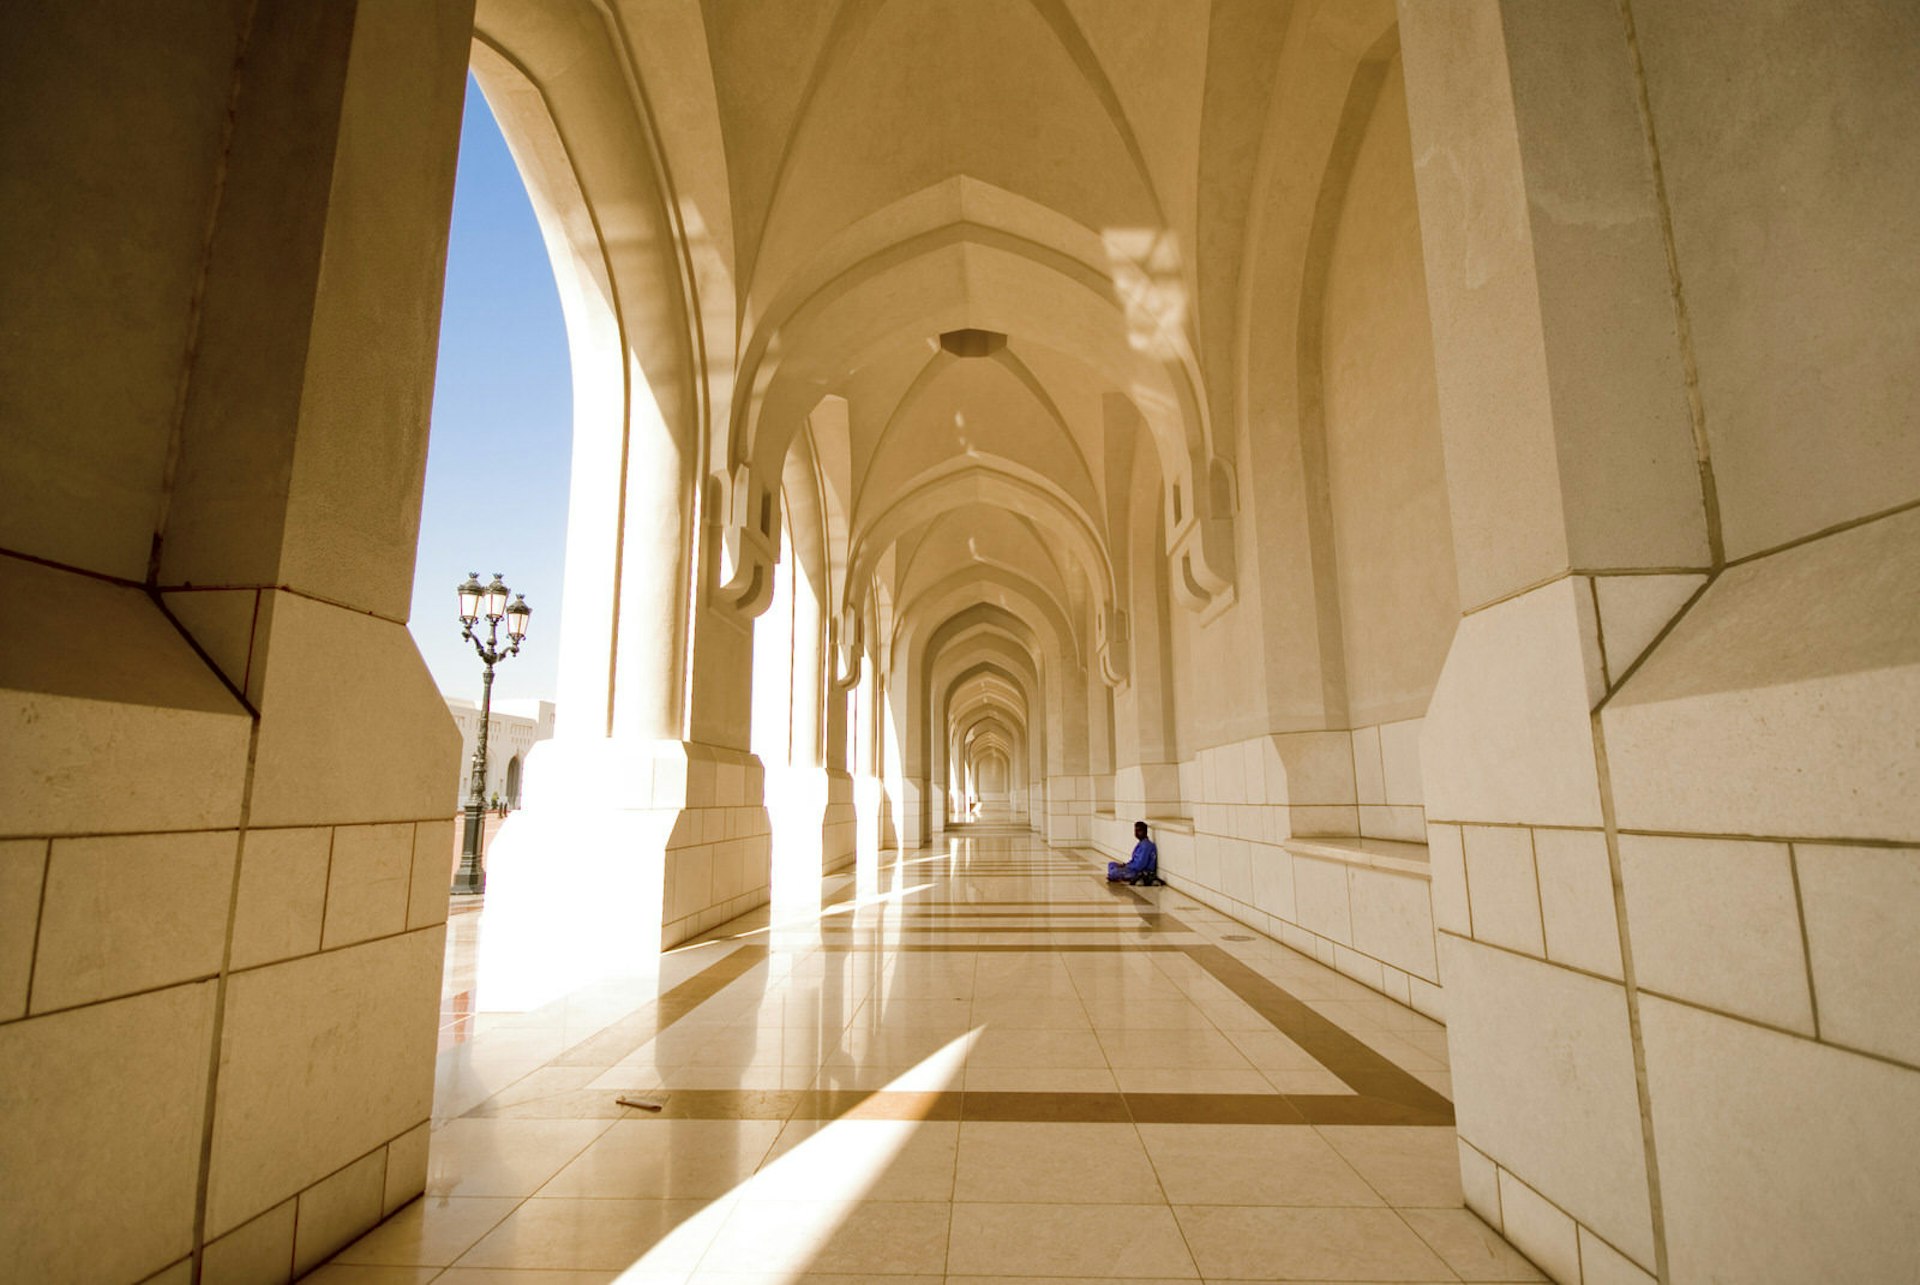 Finding a shady spot in the corridors approaching the Sultan's Palace © Jason Jones Travel Photography / Getty Images